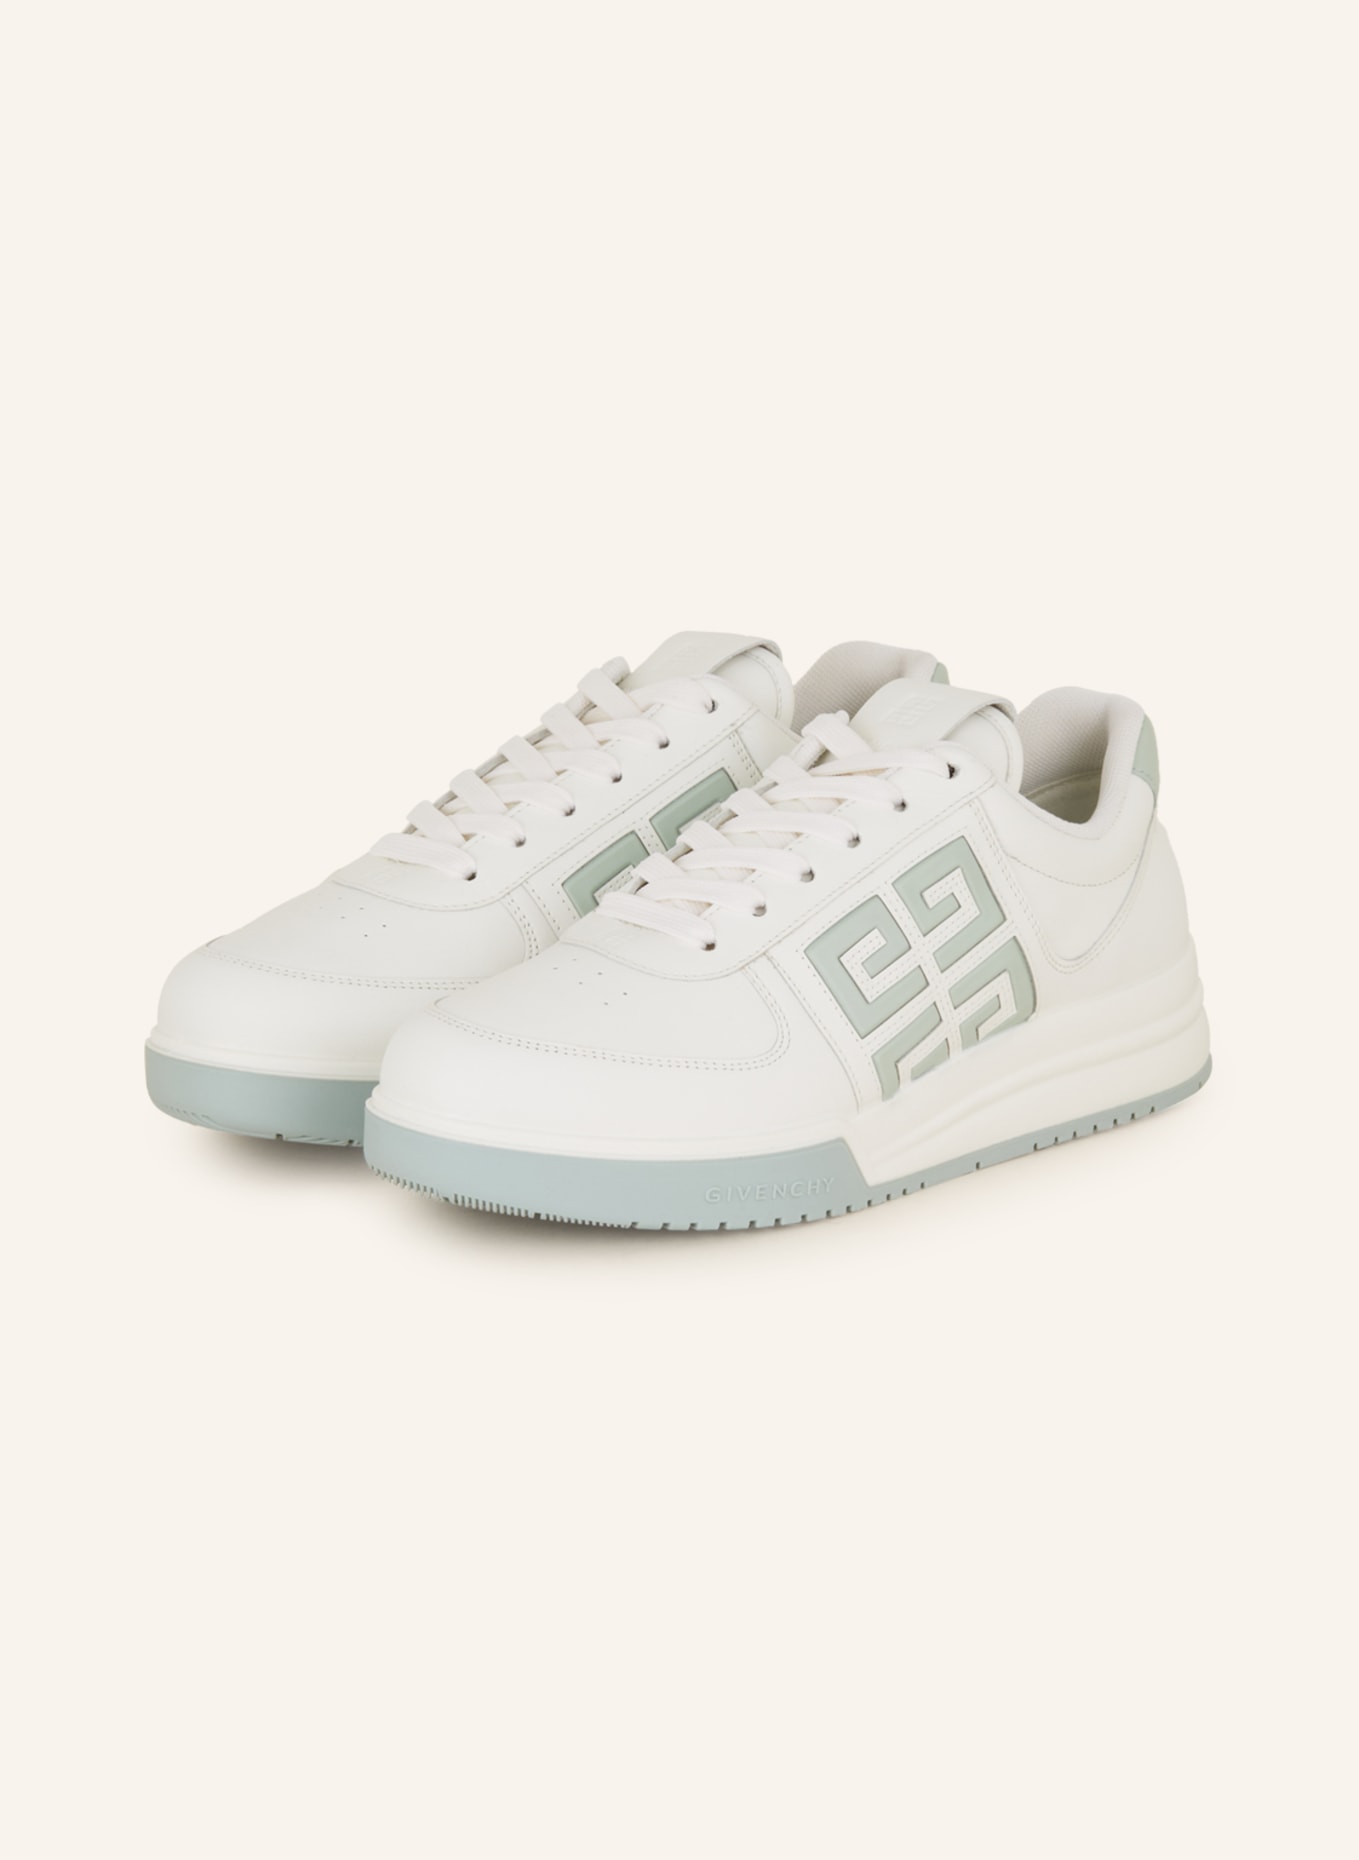 GIVENCHY Sneaker G4 , Farbe: WEISS/ MINT (Bild 1)